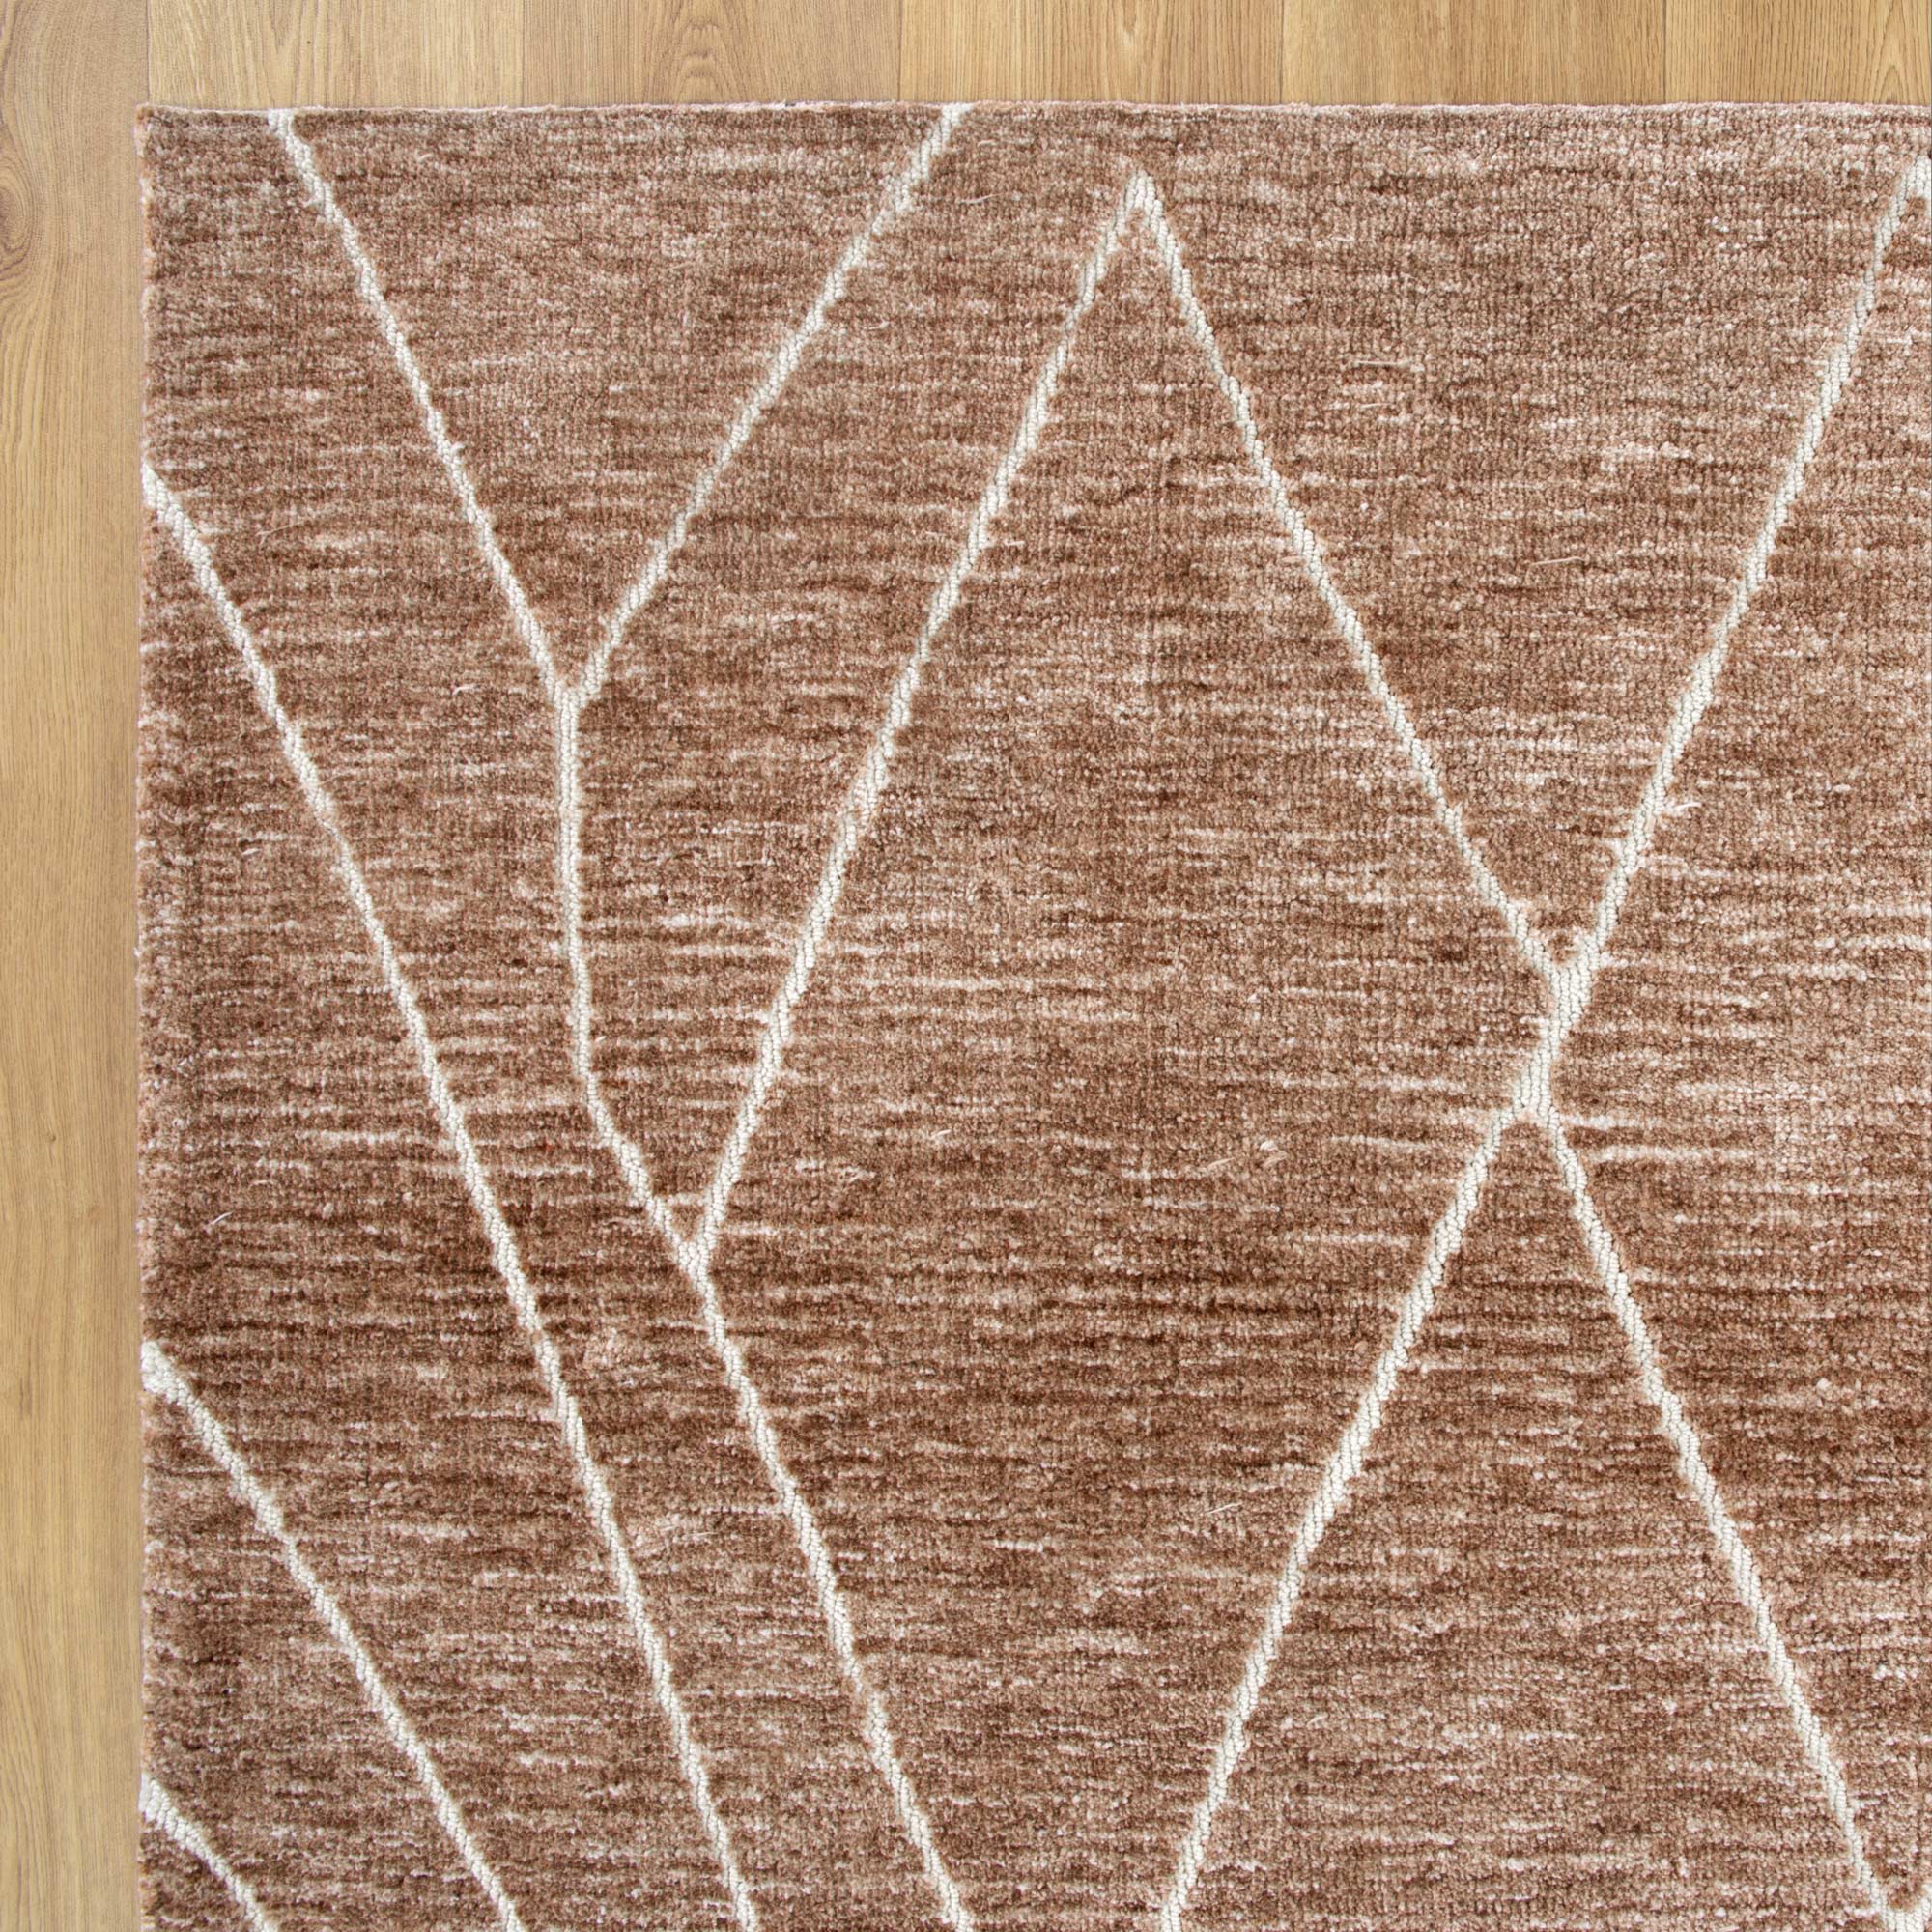 Close-up image highlighting the luxurious and sumptuous texture of the Kendra Rug, emphasising its quality polyester material.